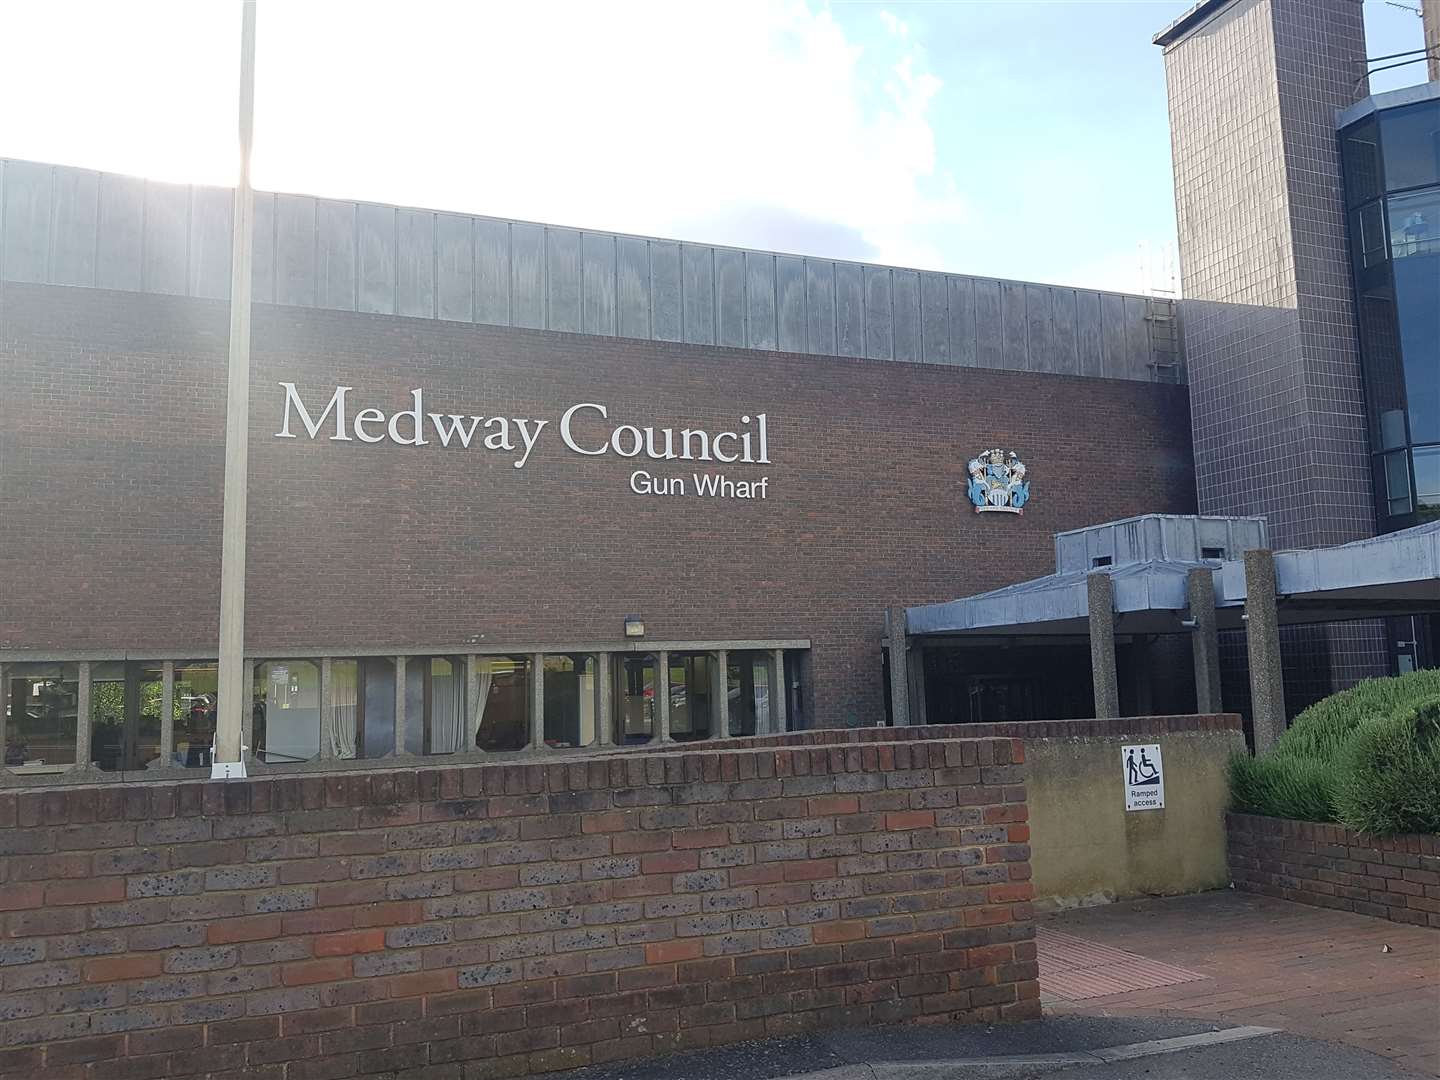 Gun Wharf is the home of Medway Council - created during the 1990s